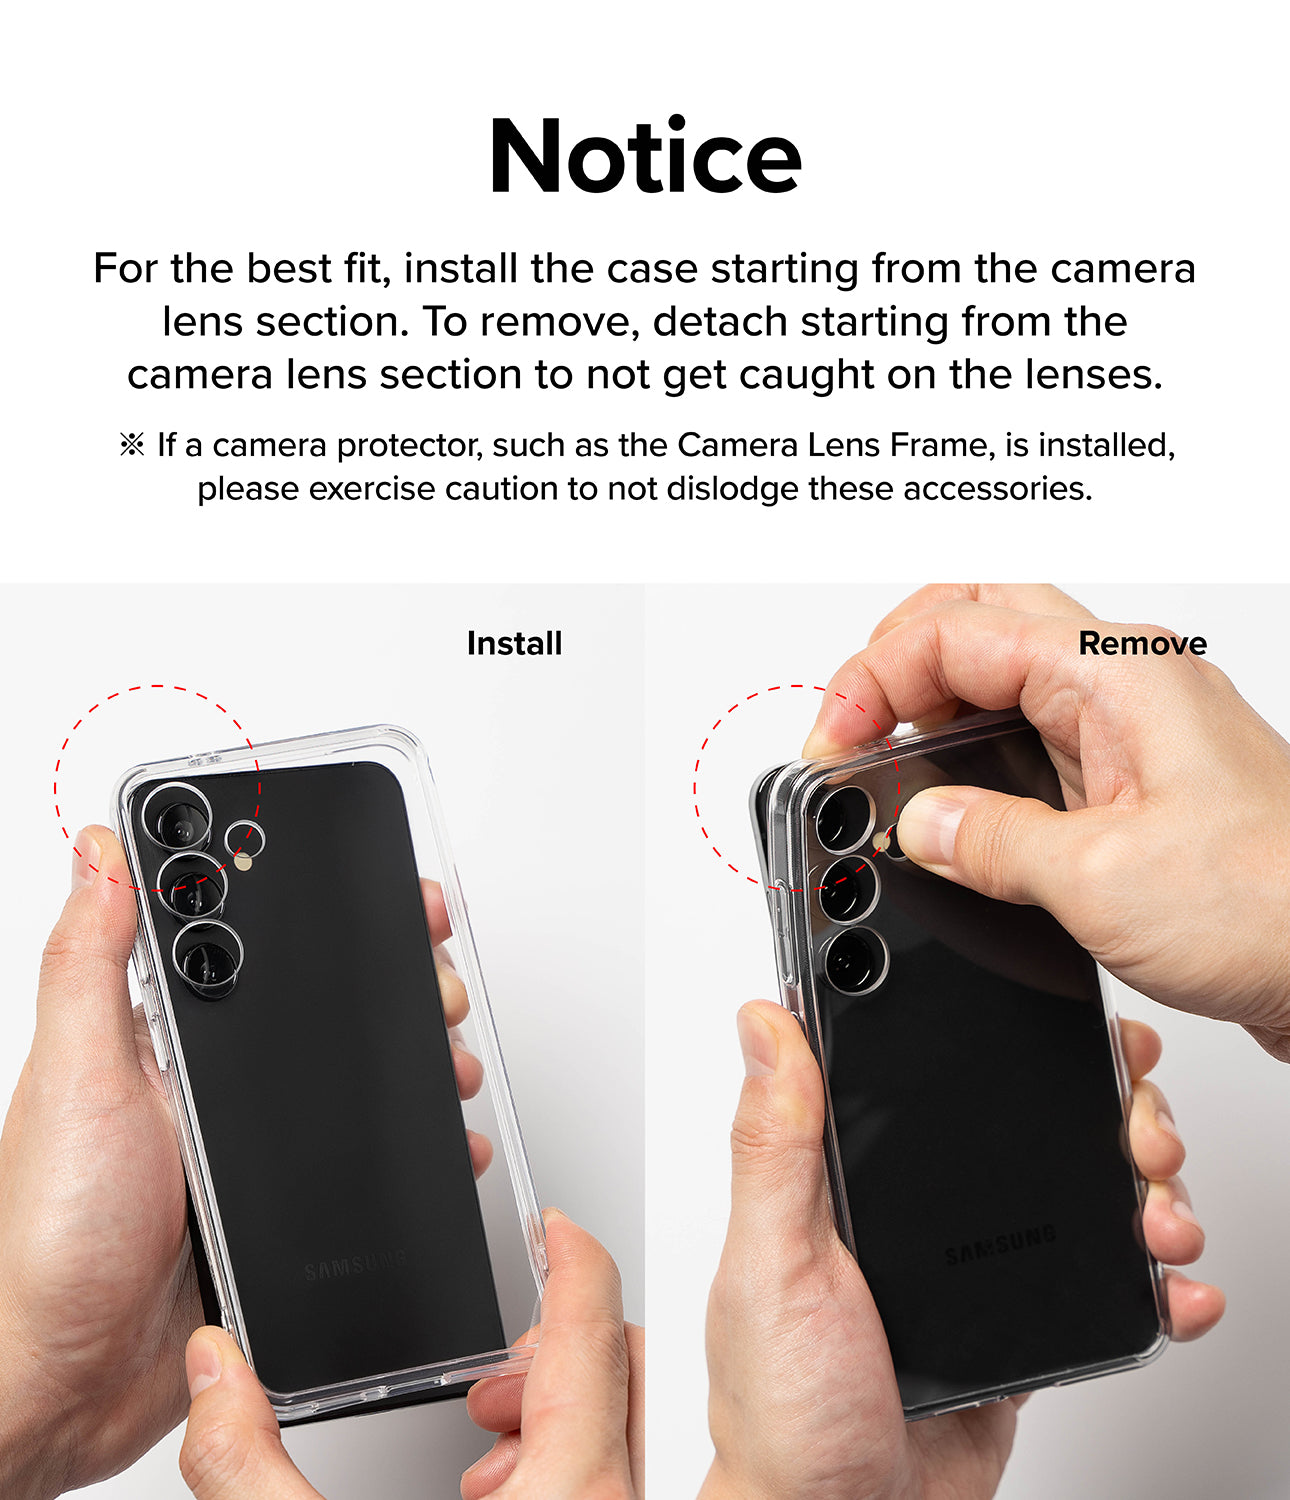 Galaxy S24 Ultra Case | Fusion-X - Black - Notice. For the best fit, install the case starting from the camera lens section. To remove, detach starting from the camera lens section to not get caught on the lenses.